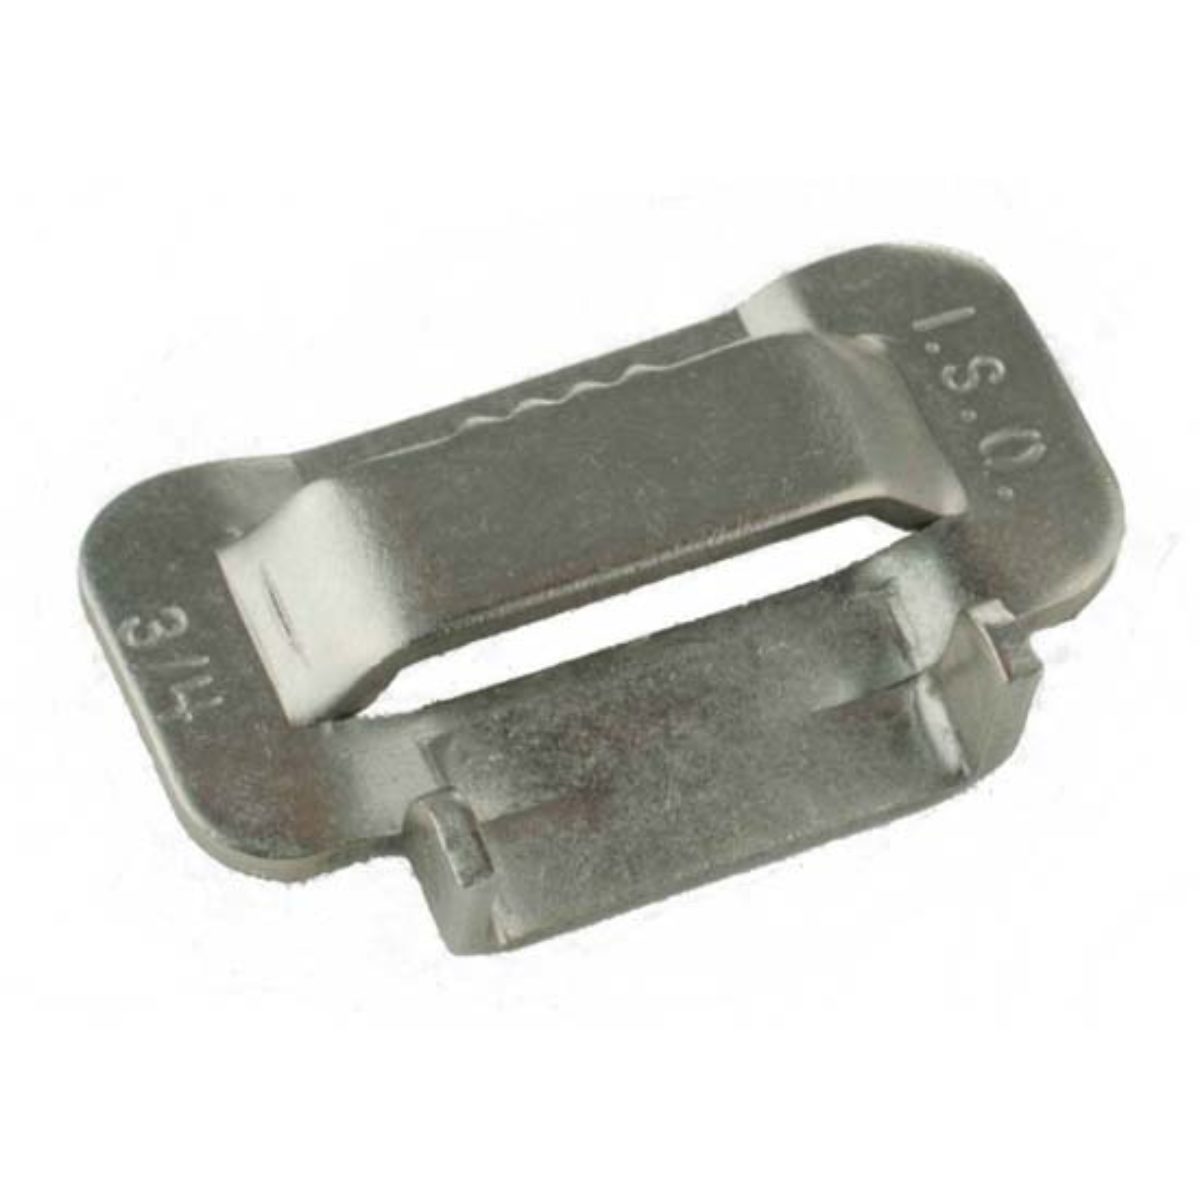 IDEAL TRIDON - Band Clamps & Buckles; Buckle Type: Banding Strap; Material:  Stainless Steel; Material Grade: 201 - 45966991 - MSC Industrial Supply